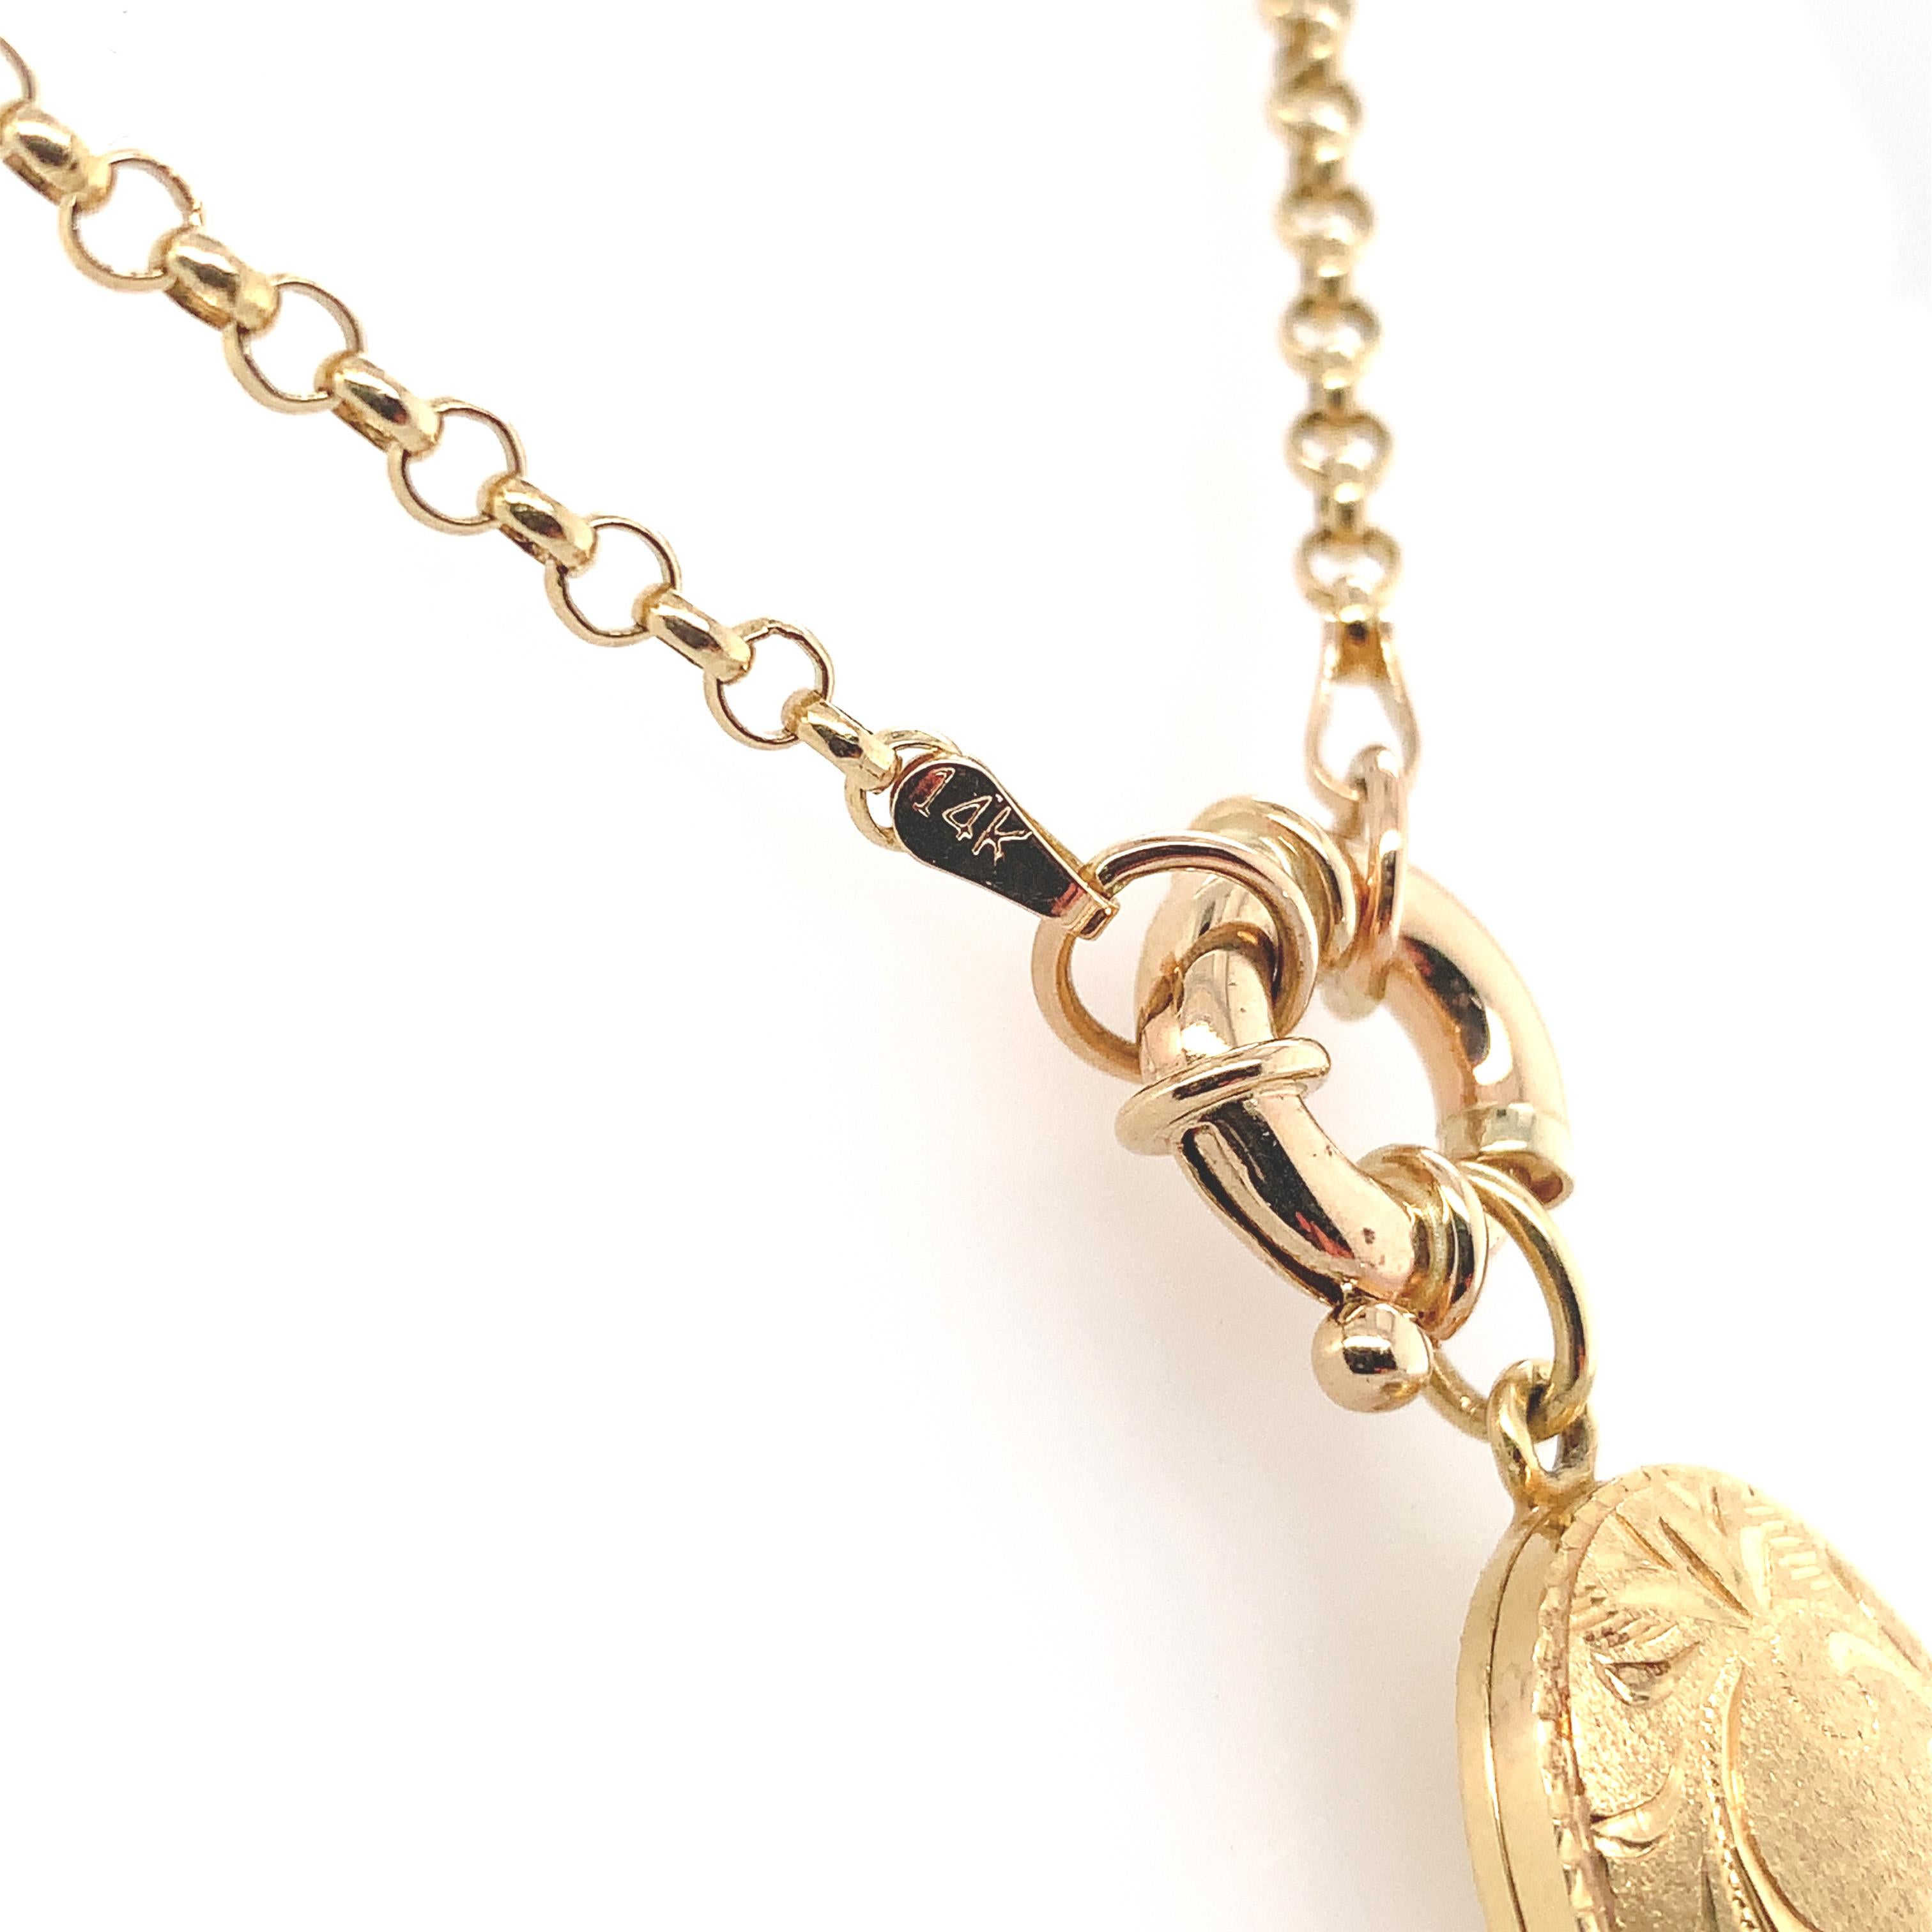 14K Yellow Gold Oval Locket with Decorative Heavy Chain For Sale 4